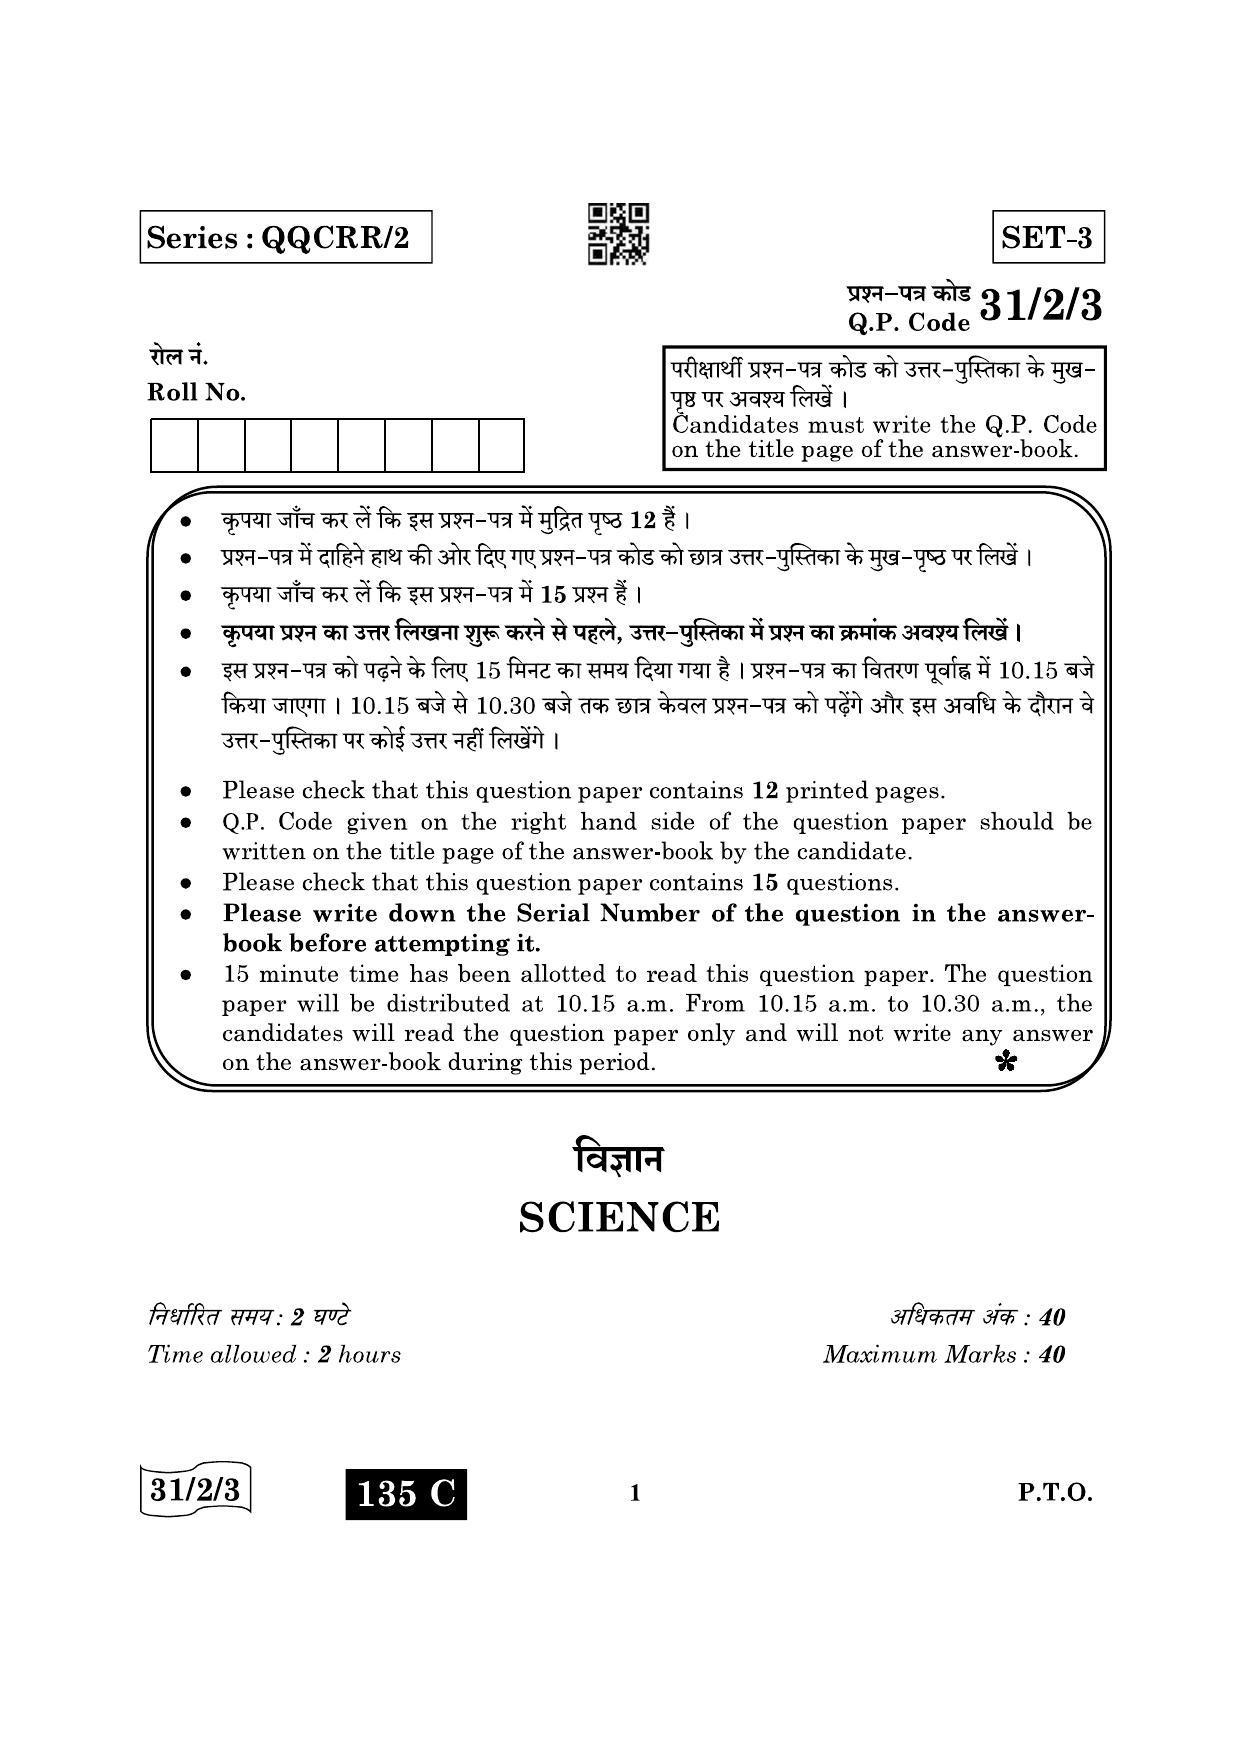 CBSE Class 10 31-2-3 Science 2022 Question Paper - Page 1